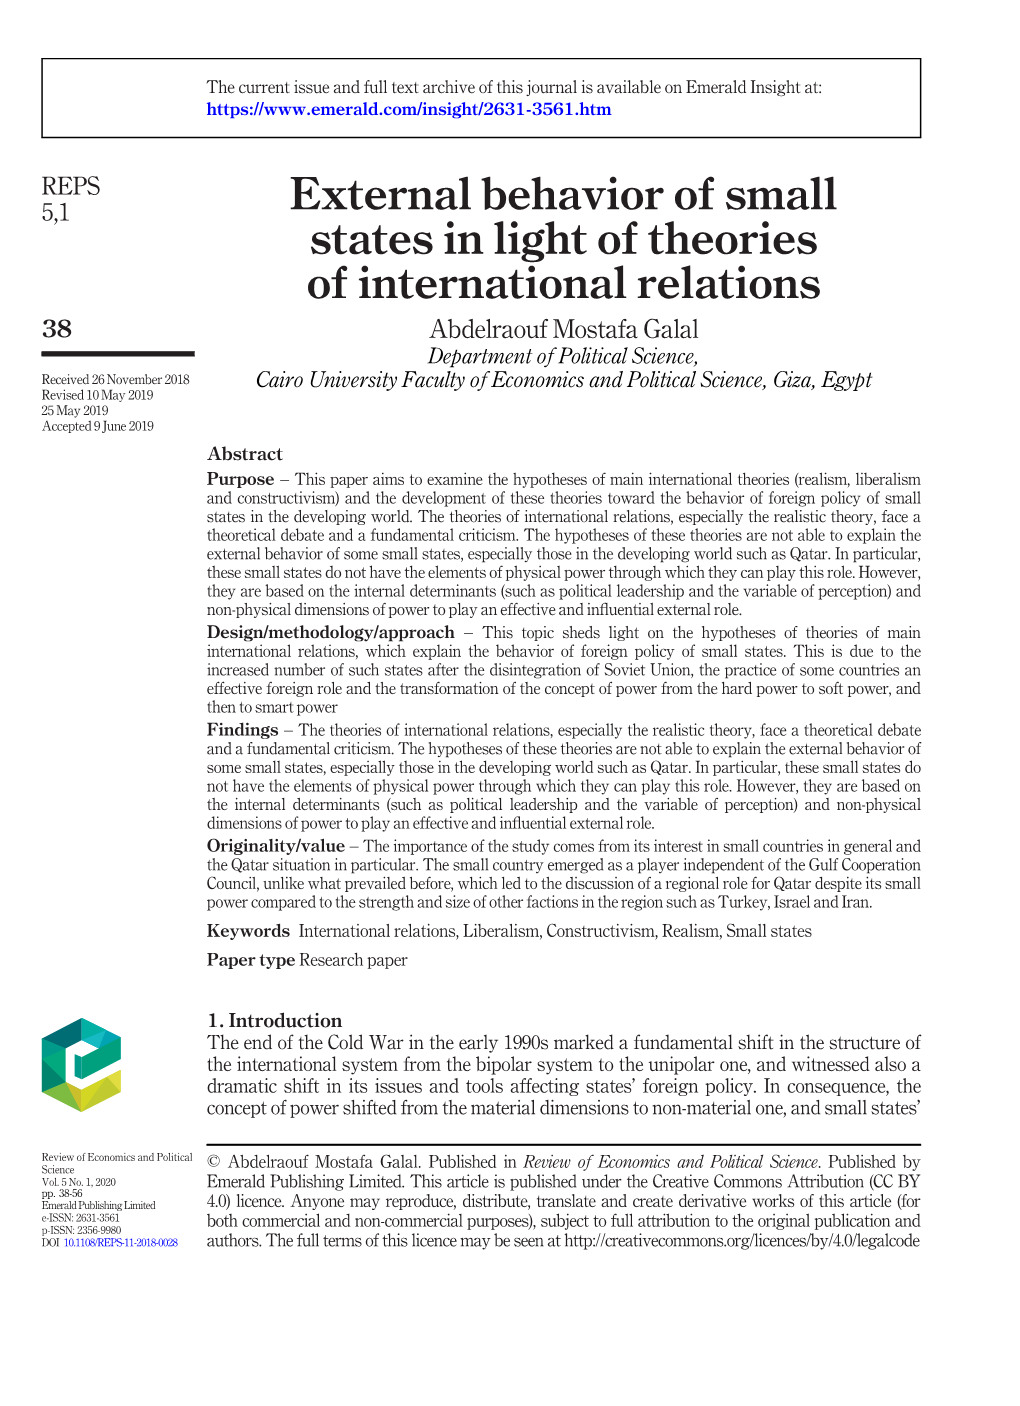 External Behavior of Small States in Light of Theories of International Relations